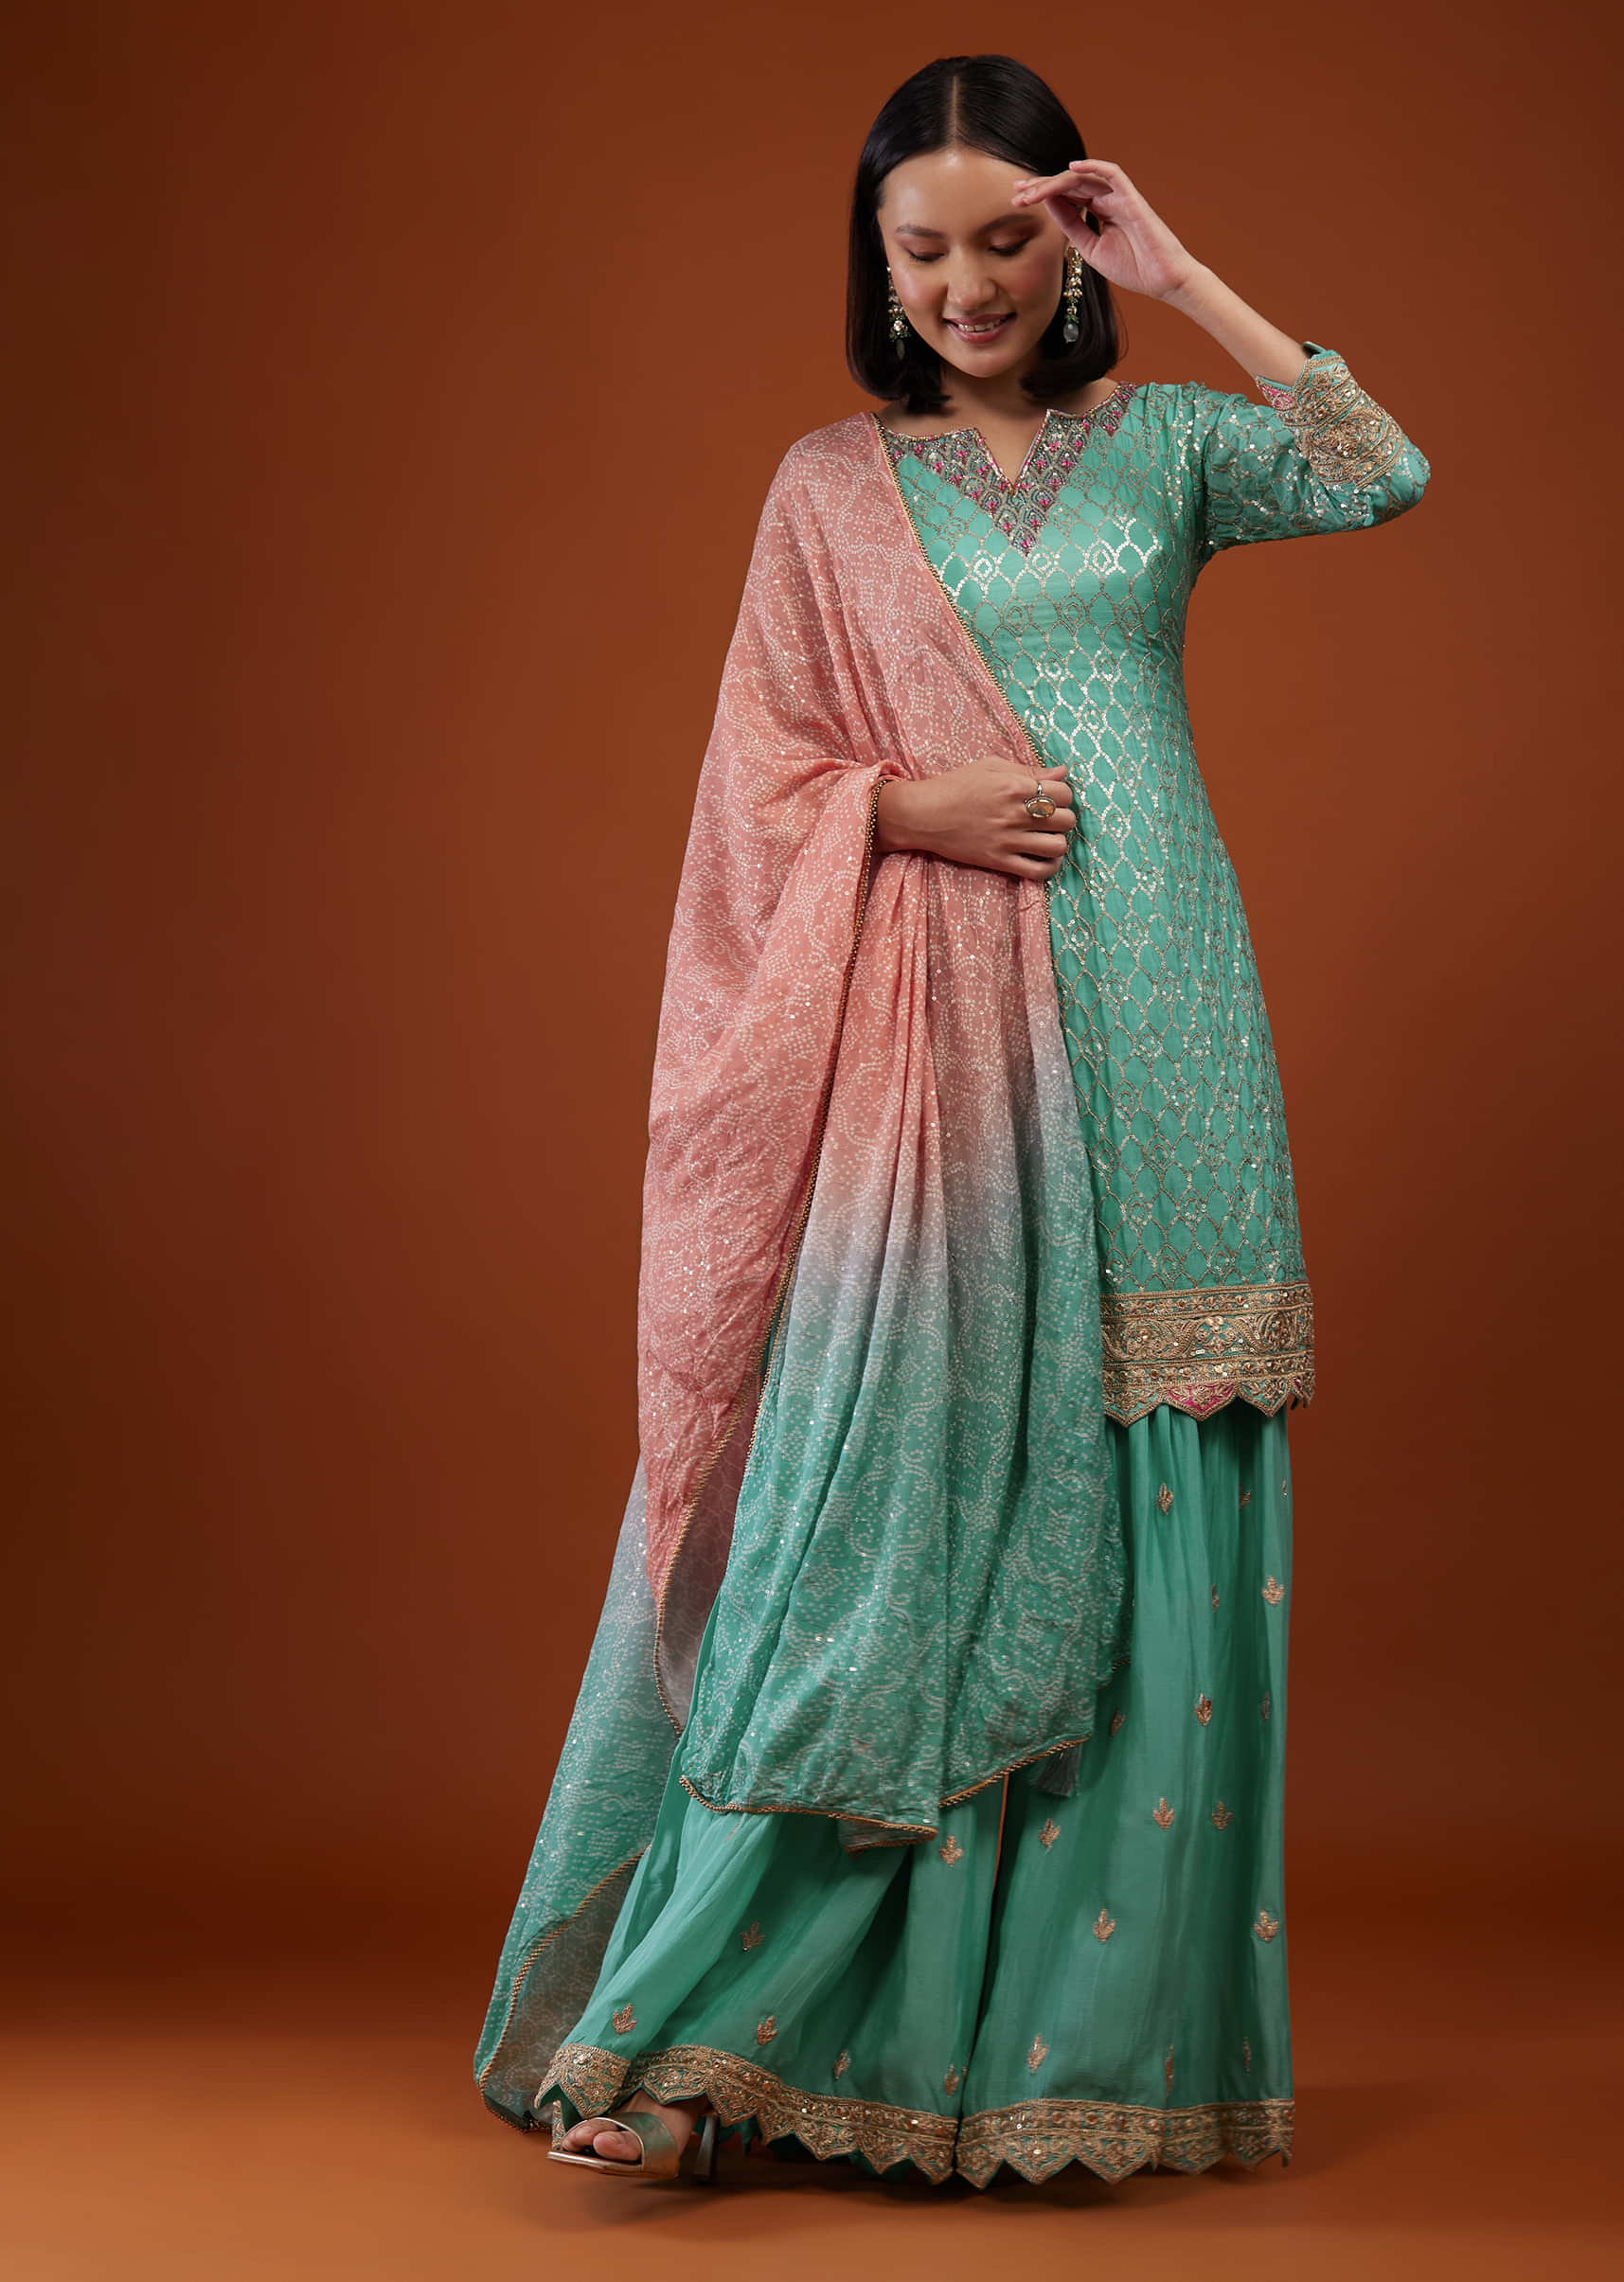 Electric Green Sharara Suit With Embroidery And Bandhani Dupatta